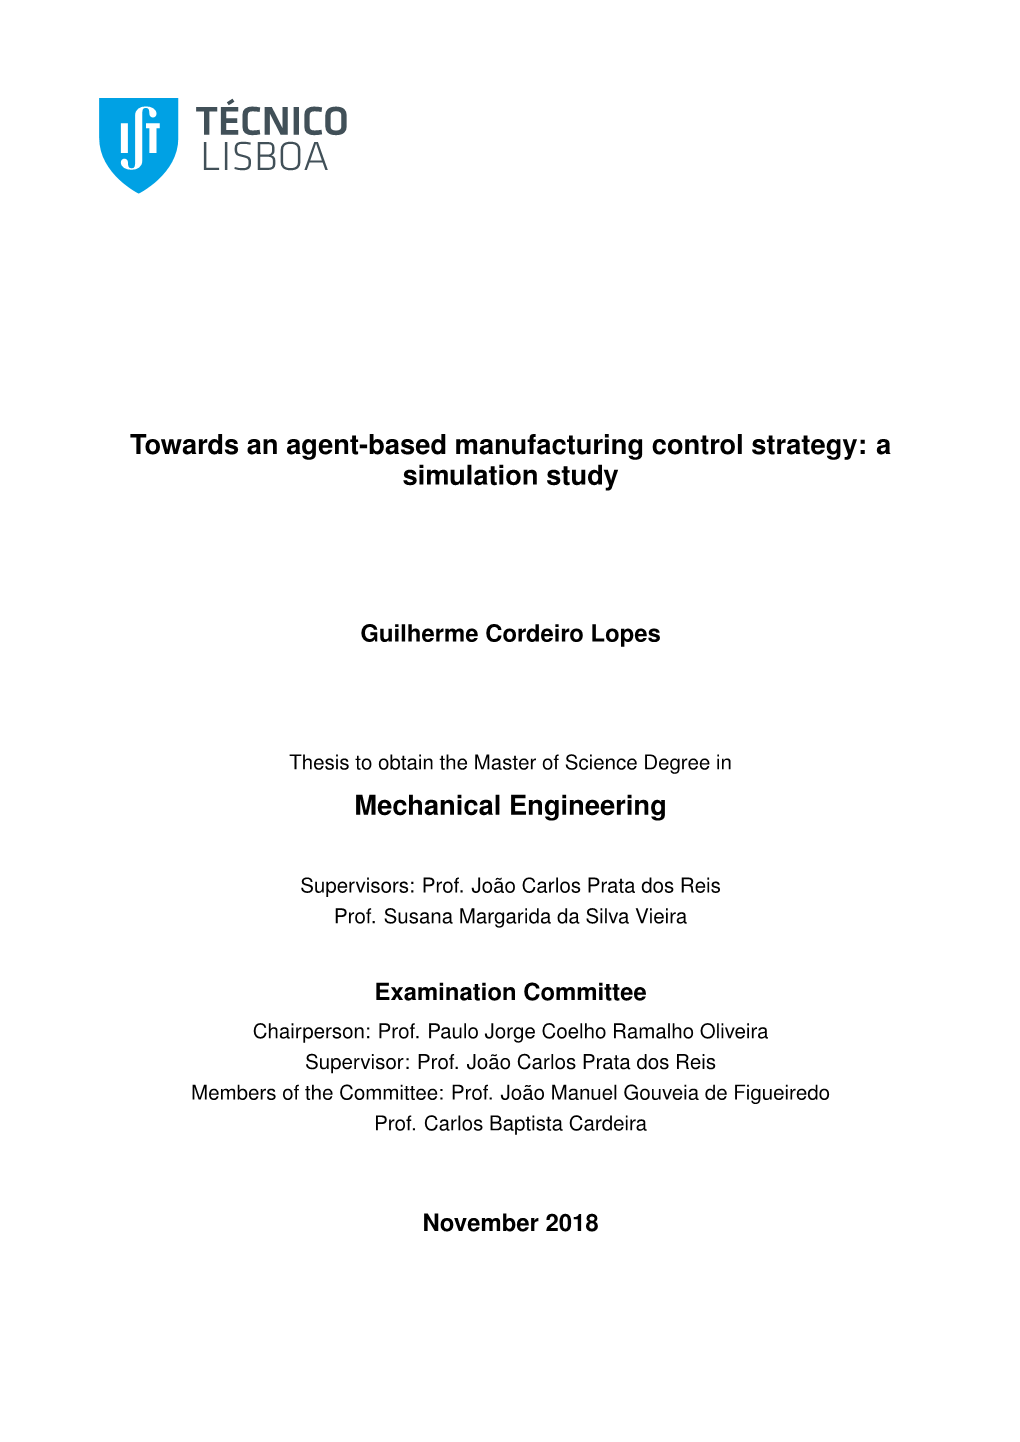 Towards an Agent-Based Manufacturing Control Strategy: a Simulation Study Mechanical Engineering